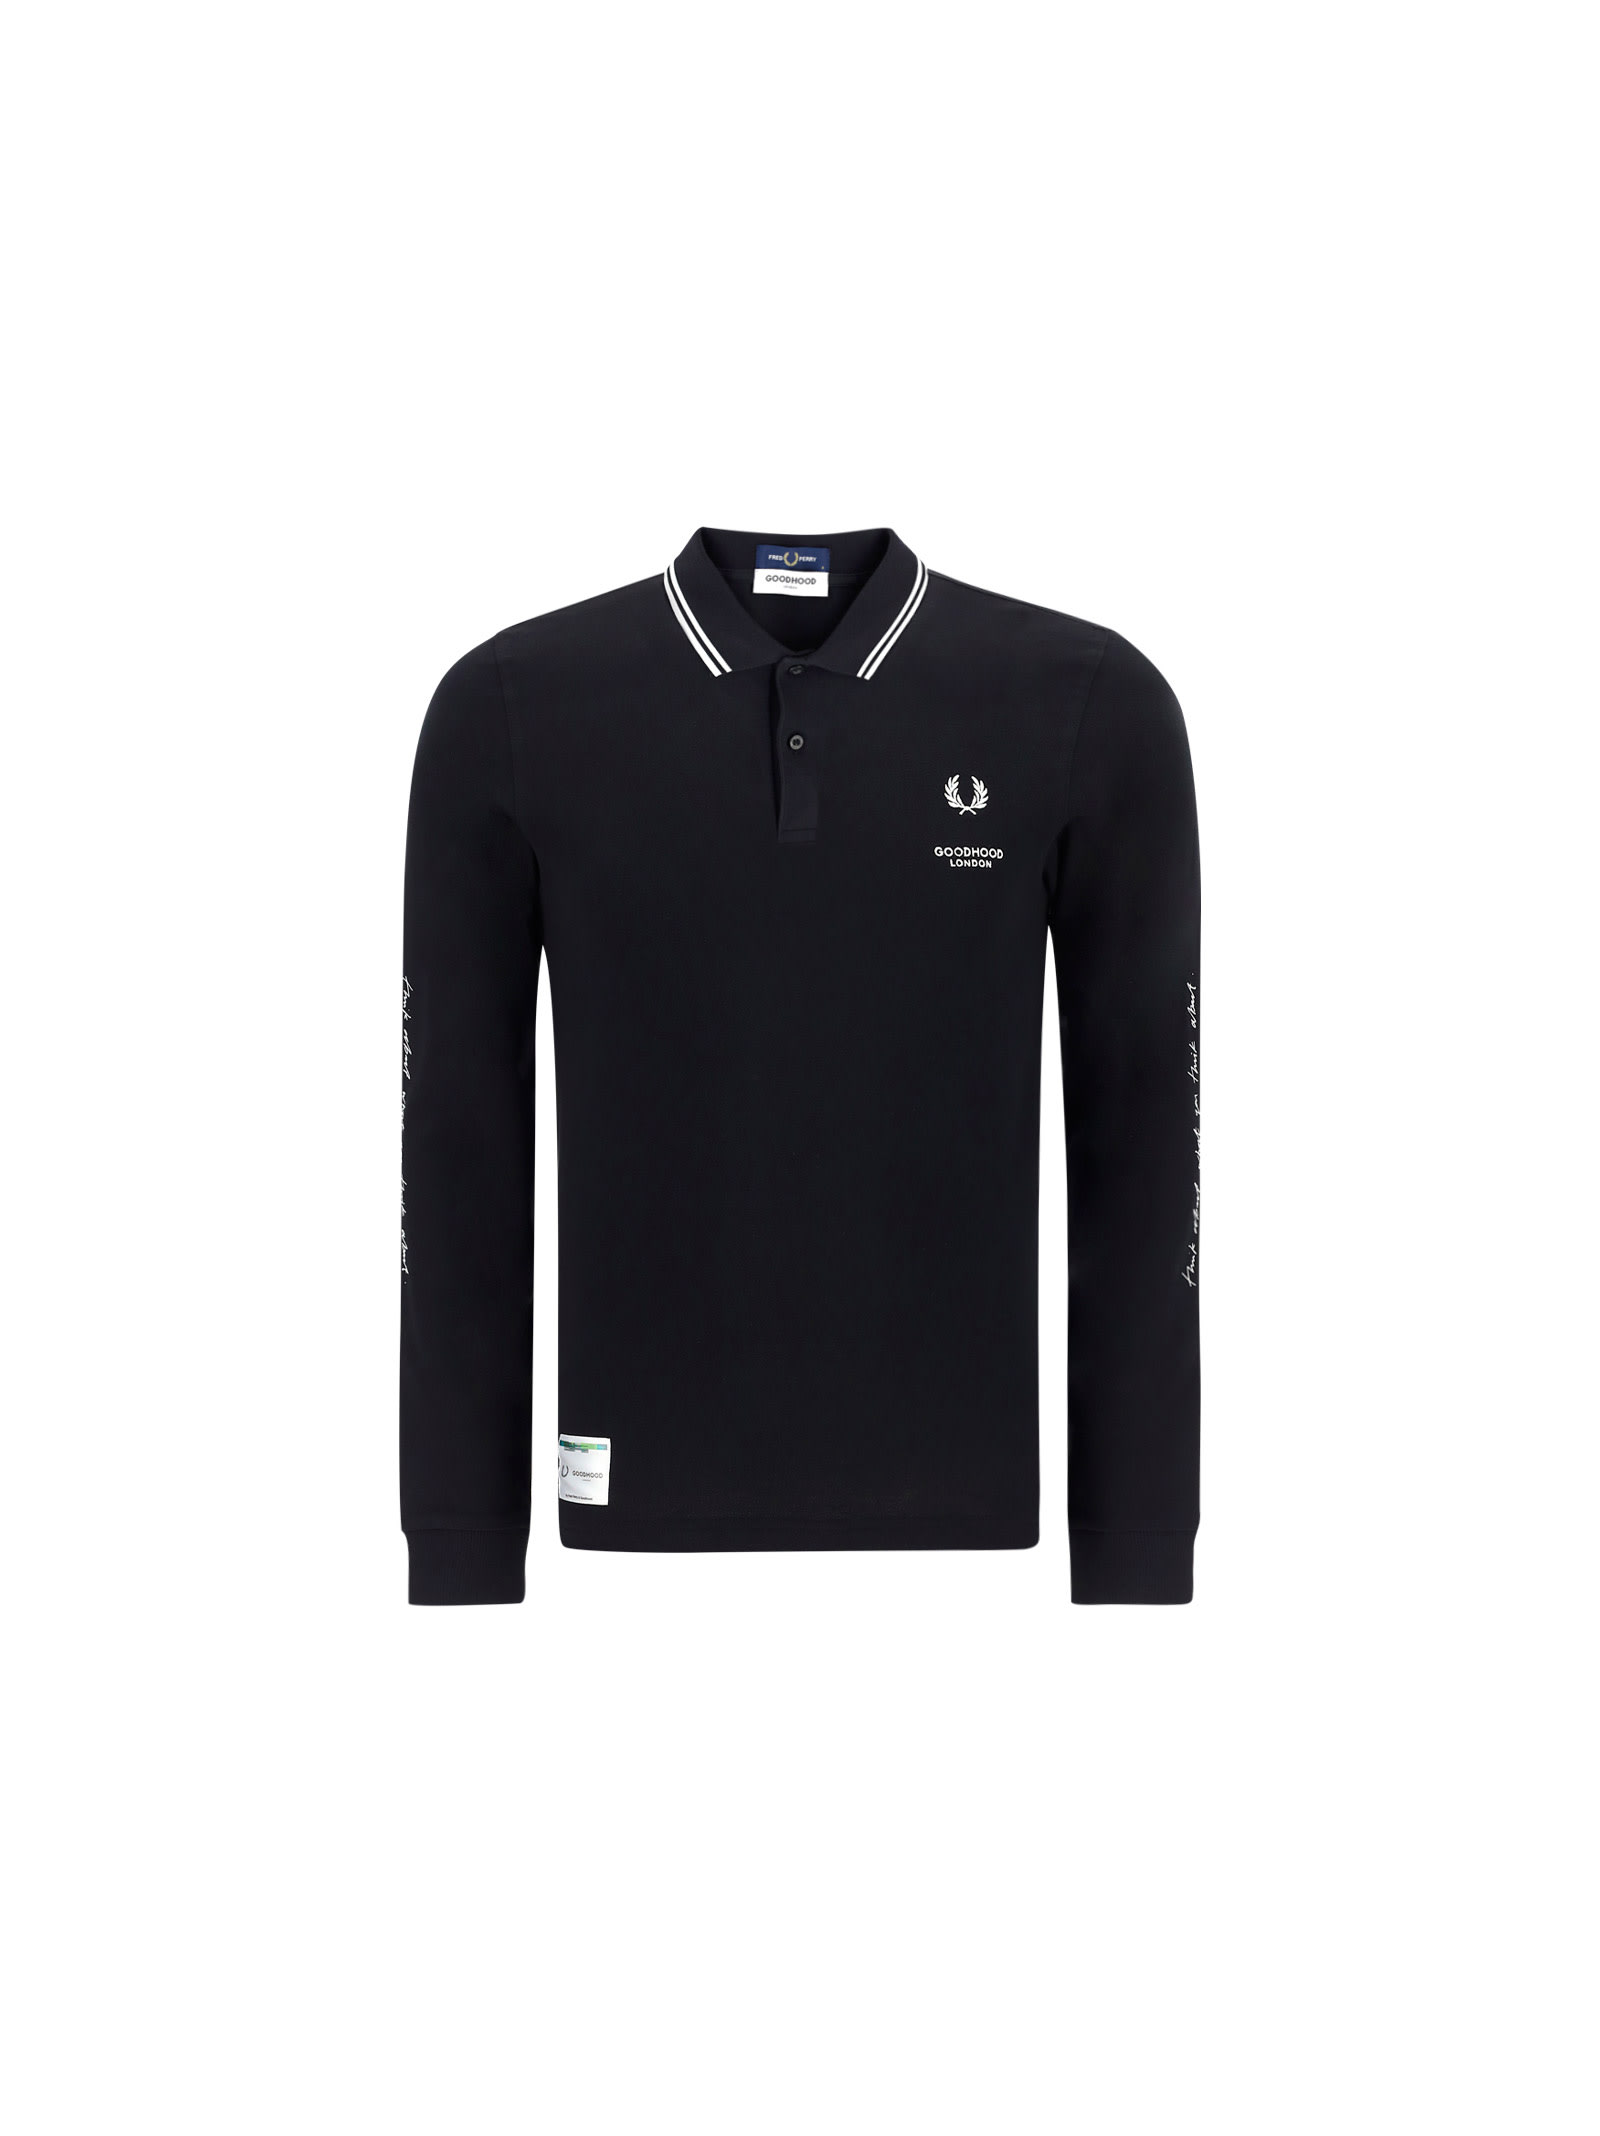 FRED PERRY POLO SHIRT,FPSM188637 102